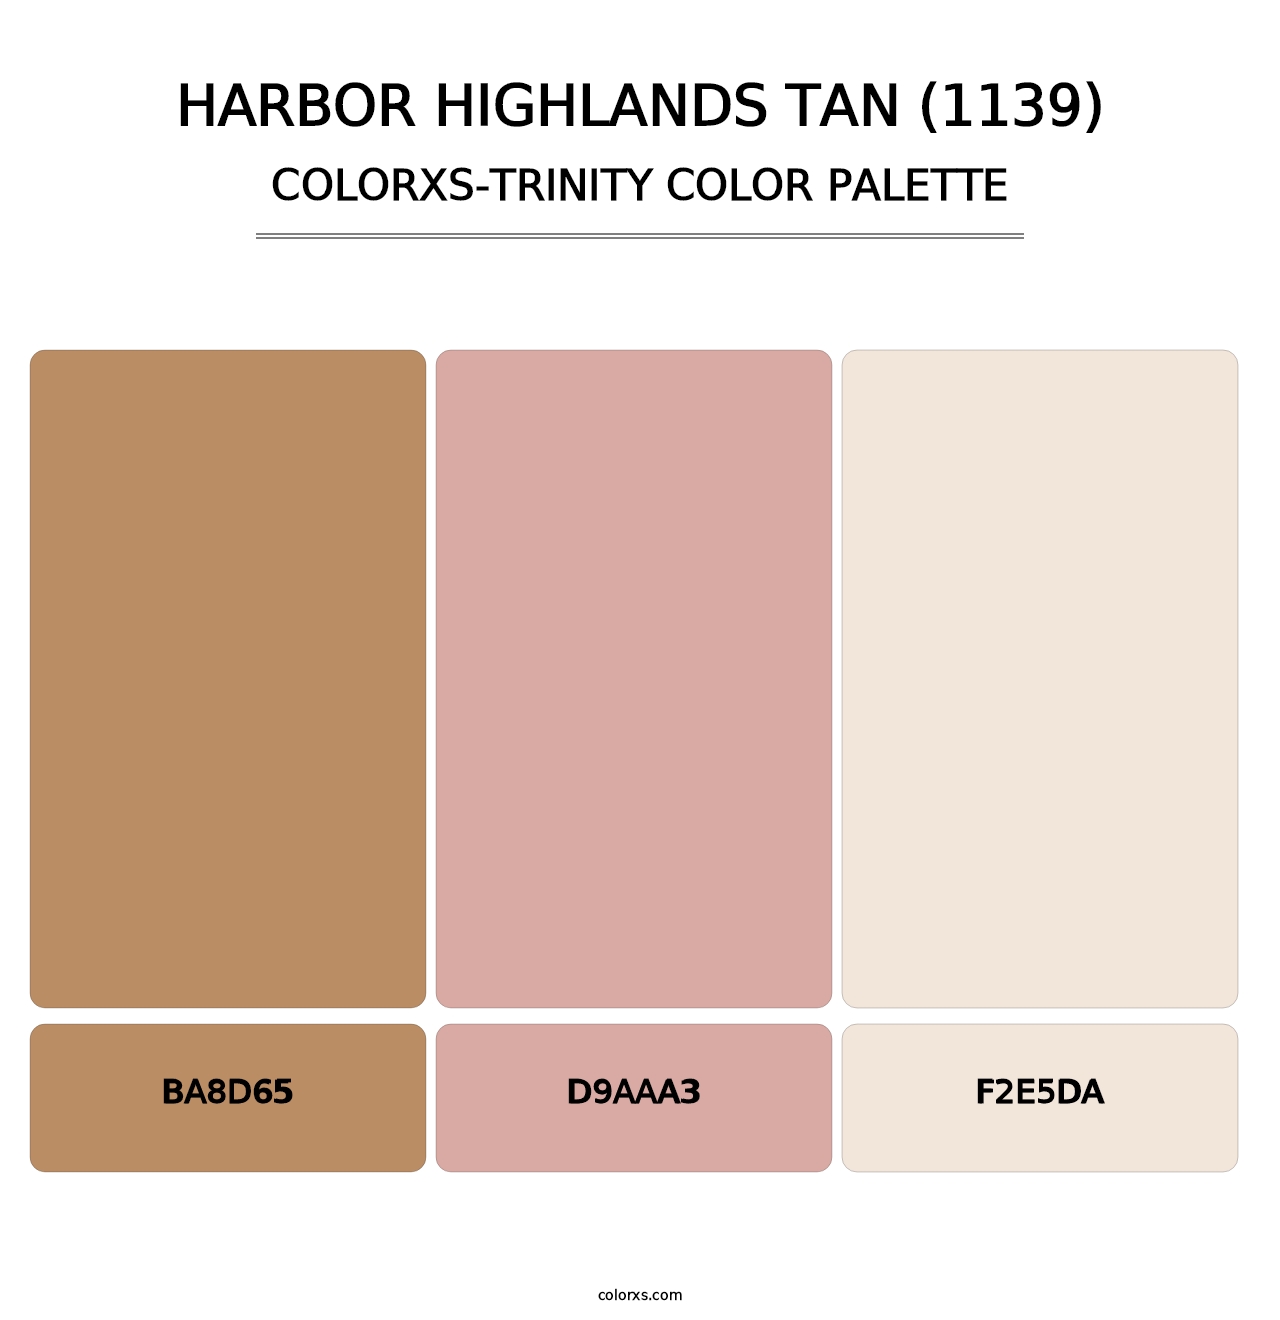 Harbor Highlands Tan (1139) - Colorxs Trinity Palette